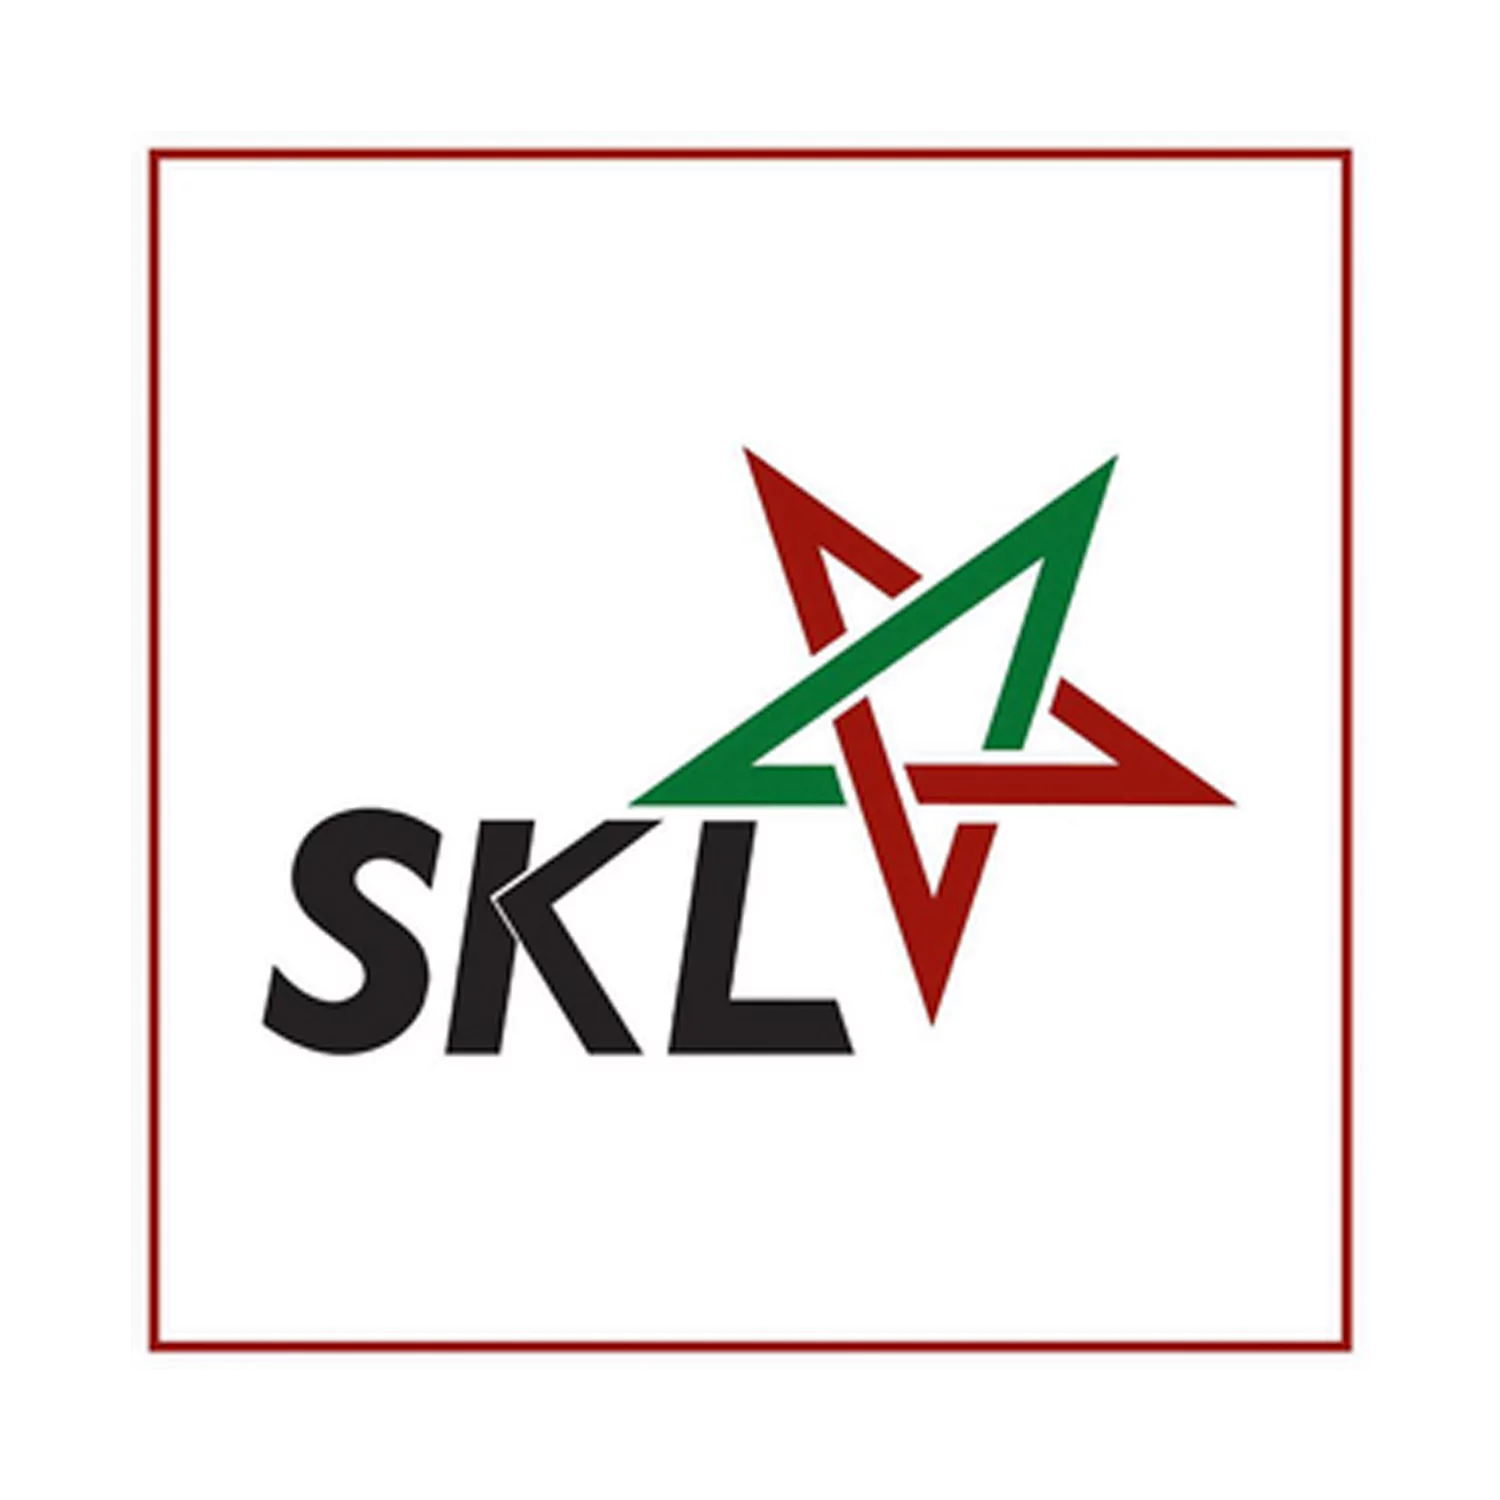 The Super Kabaddi League (SKL) is a professional kabaddi league, that takes place in Pakistan.